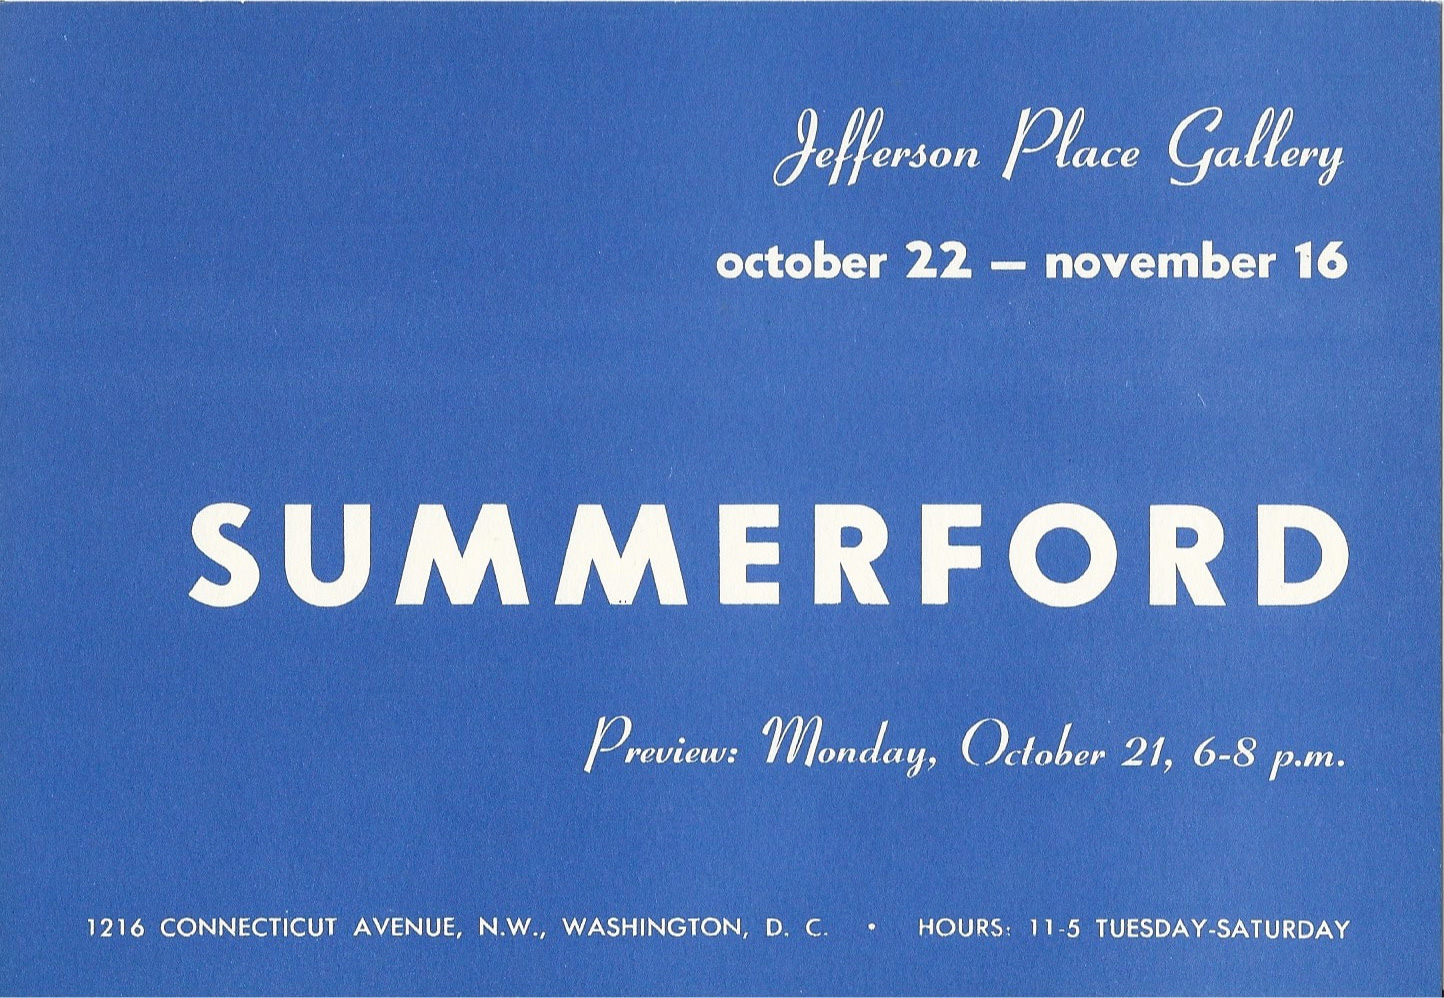 Announcement card for Ben Summerford at Jefferson Place Gallery, 1963